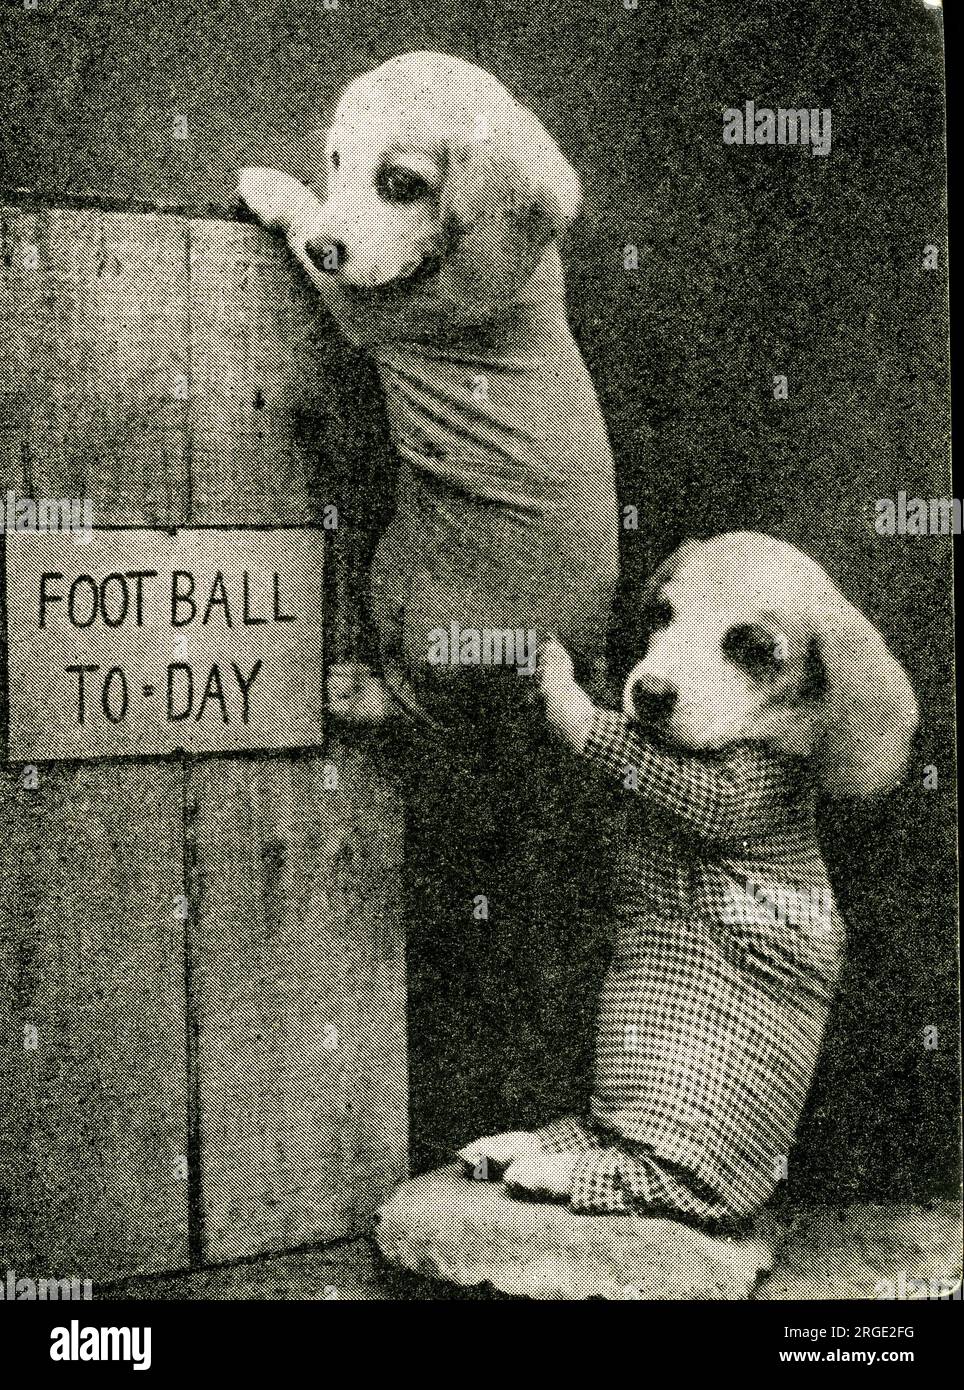 Cute Puppies: Football Today Stock Photo